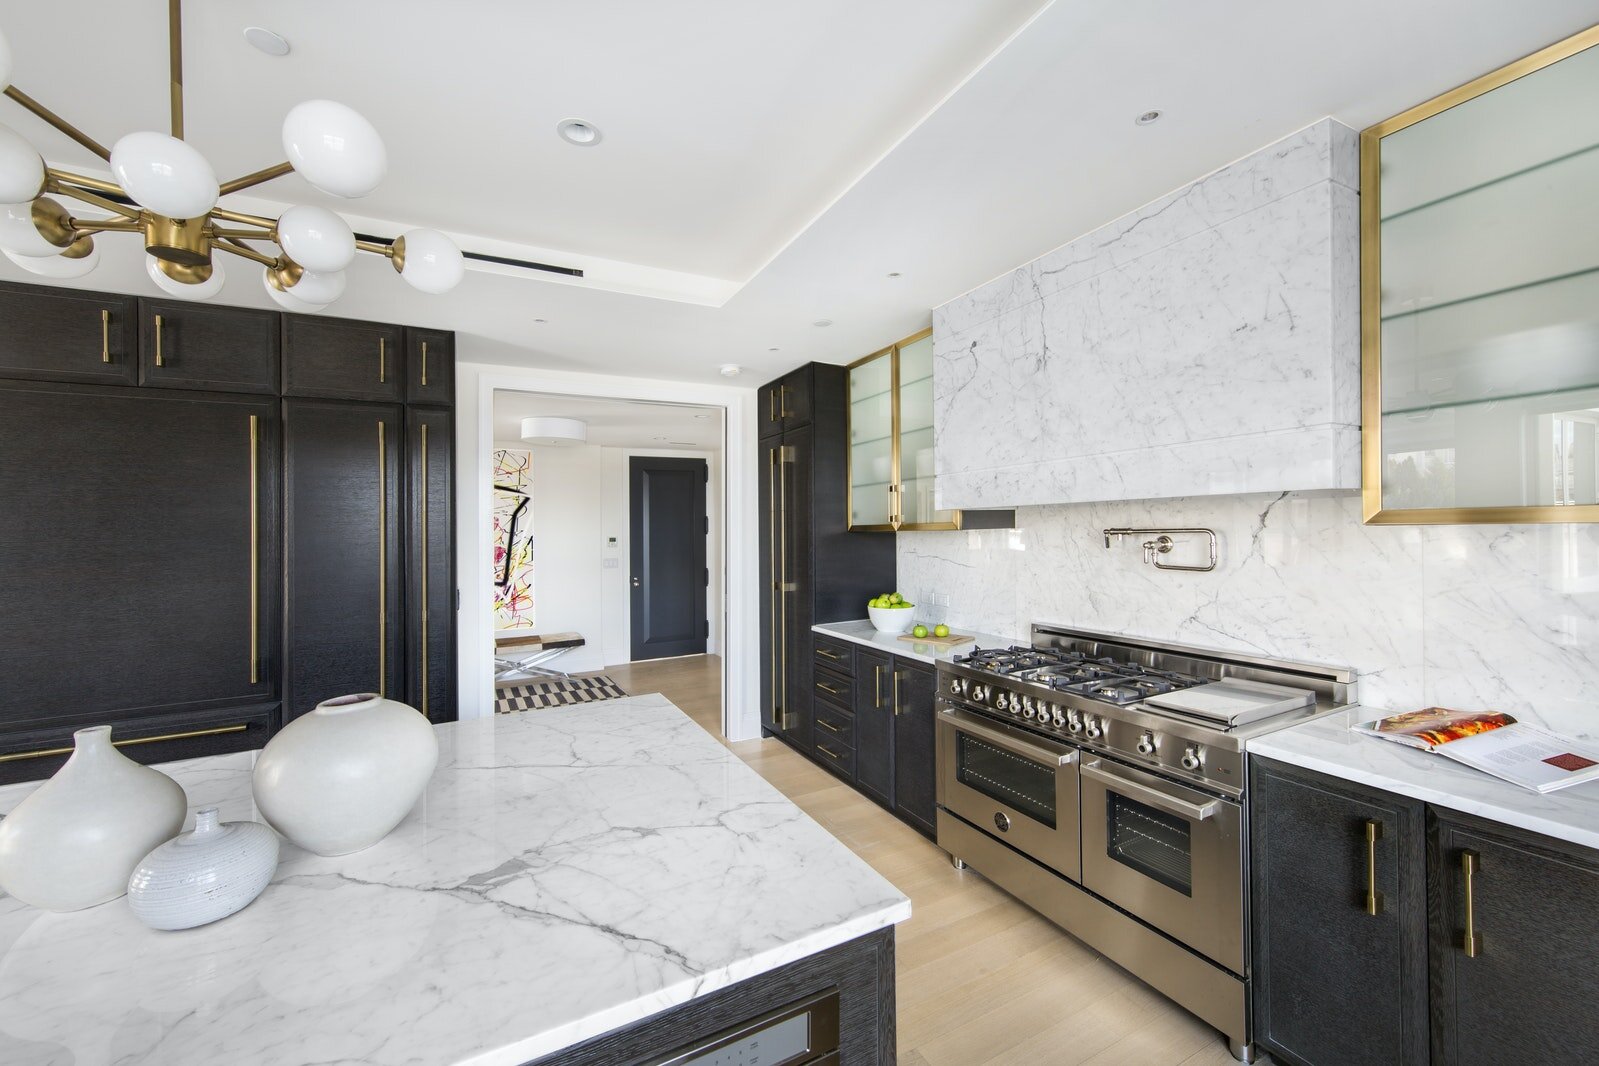   498 West End Avenue, Penthouse   Designed to deliver equal portions of elegance and functionality, every facet of the kitchen exceeds the highest standards while also delivering innovative design concepts - from the outstanding millwork in custom c